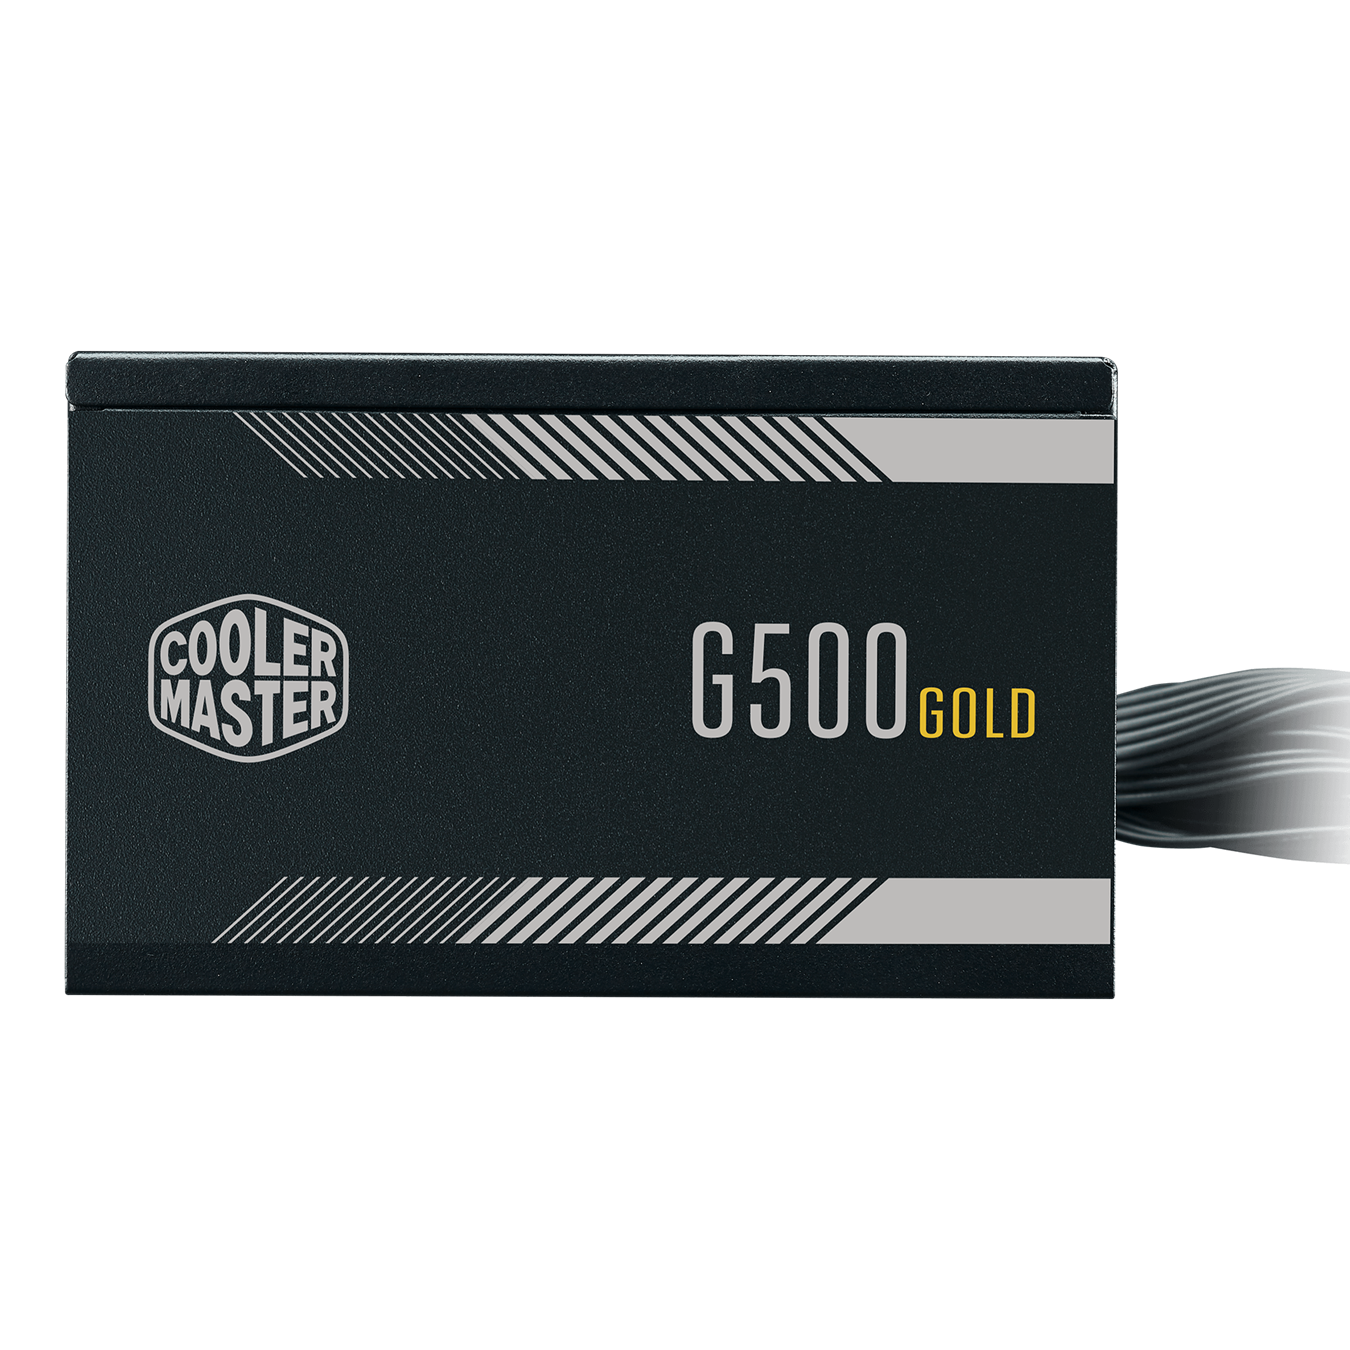 Cooler Master G500 Gold 500W 80Plus Gold 金牌 火牛 (5年保)